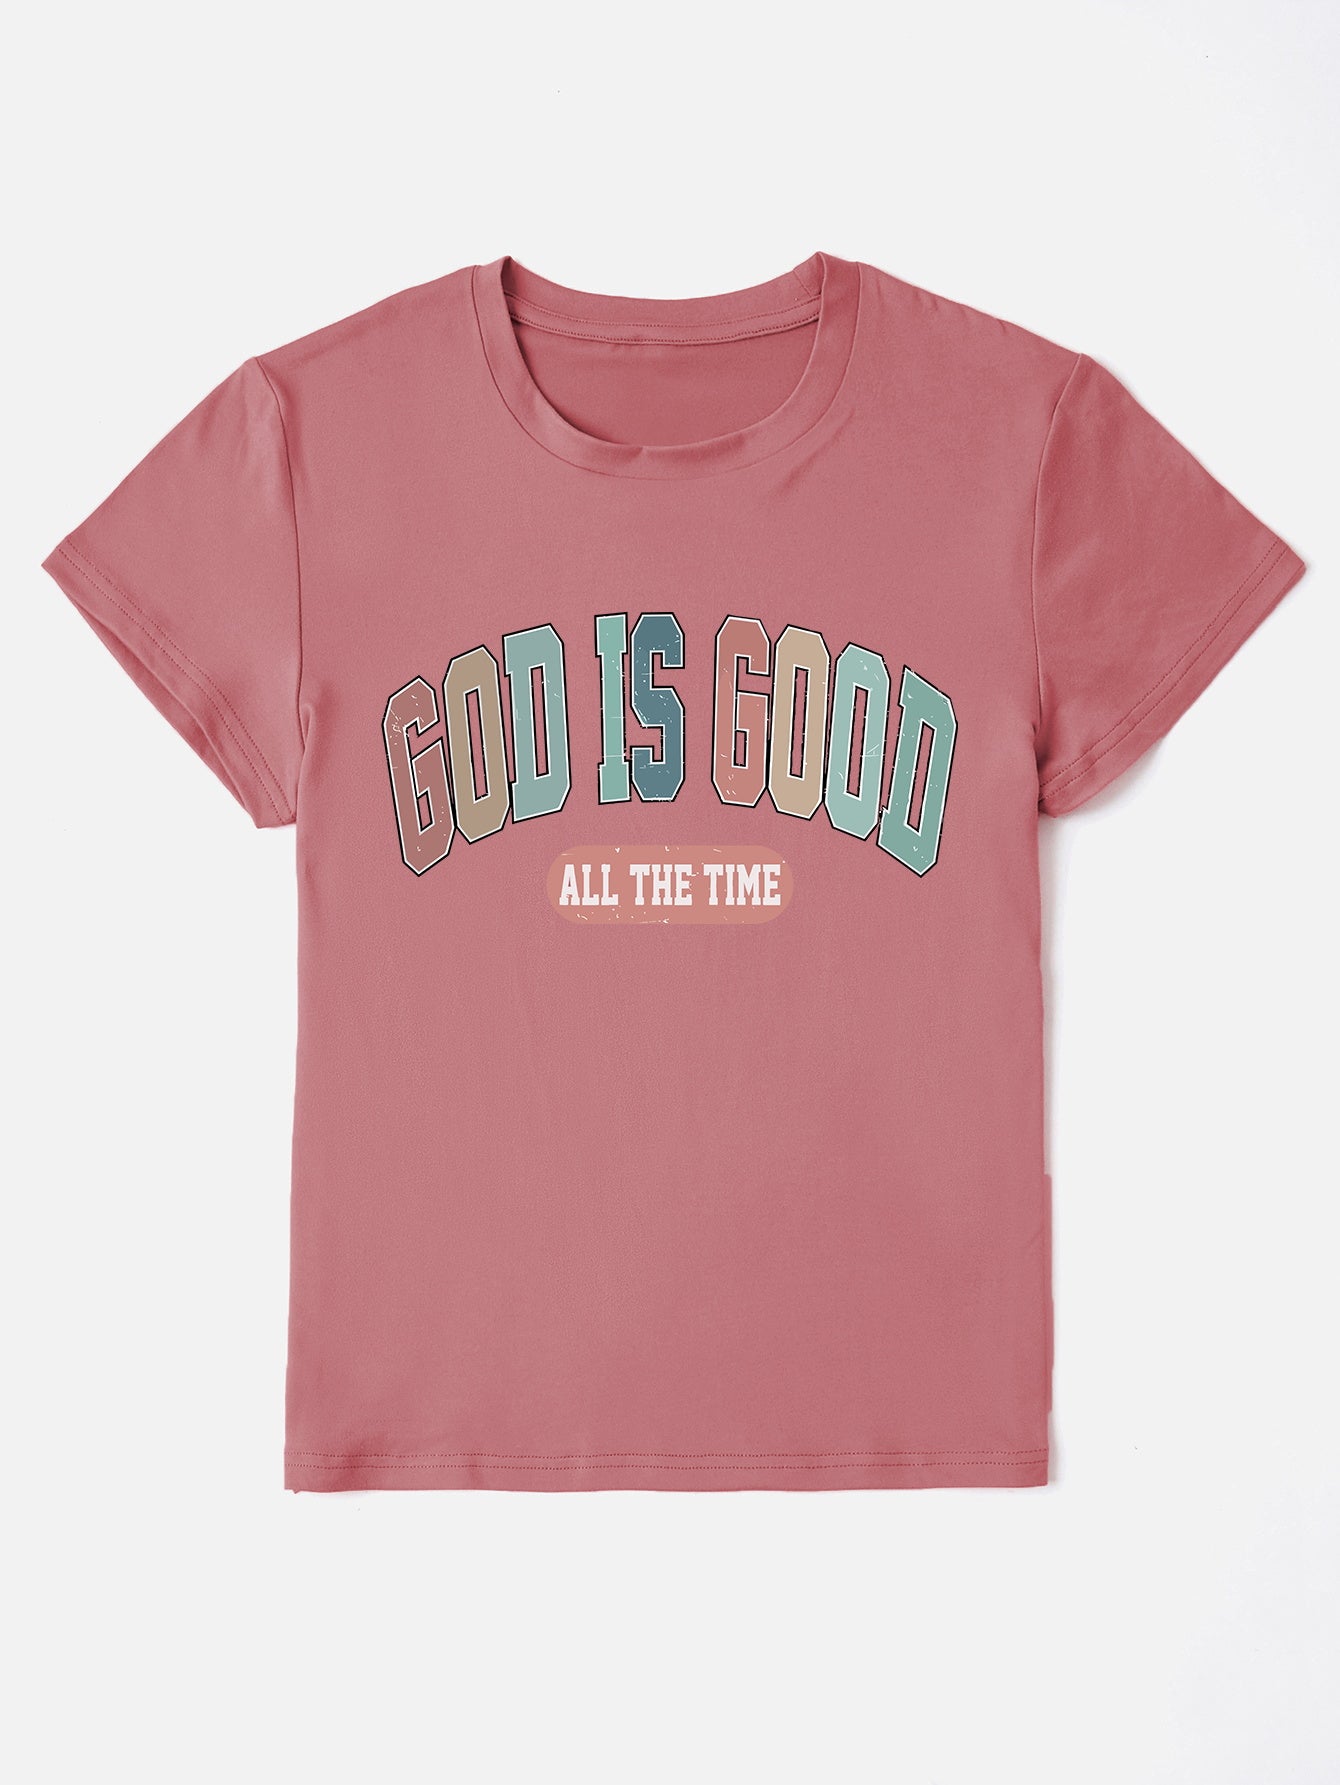 GOD IS GOOD ALL THE TIME Round Neck T-Shirt